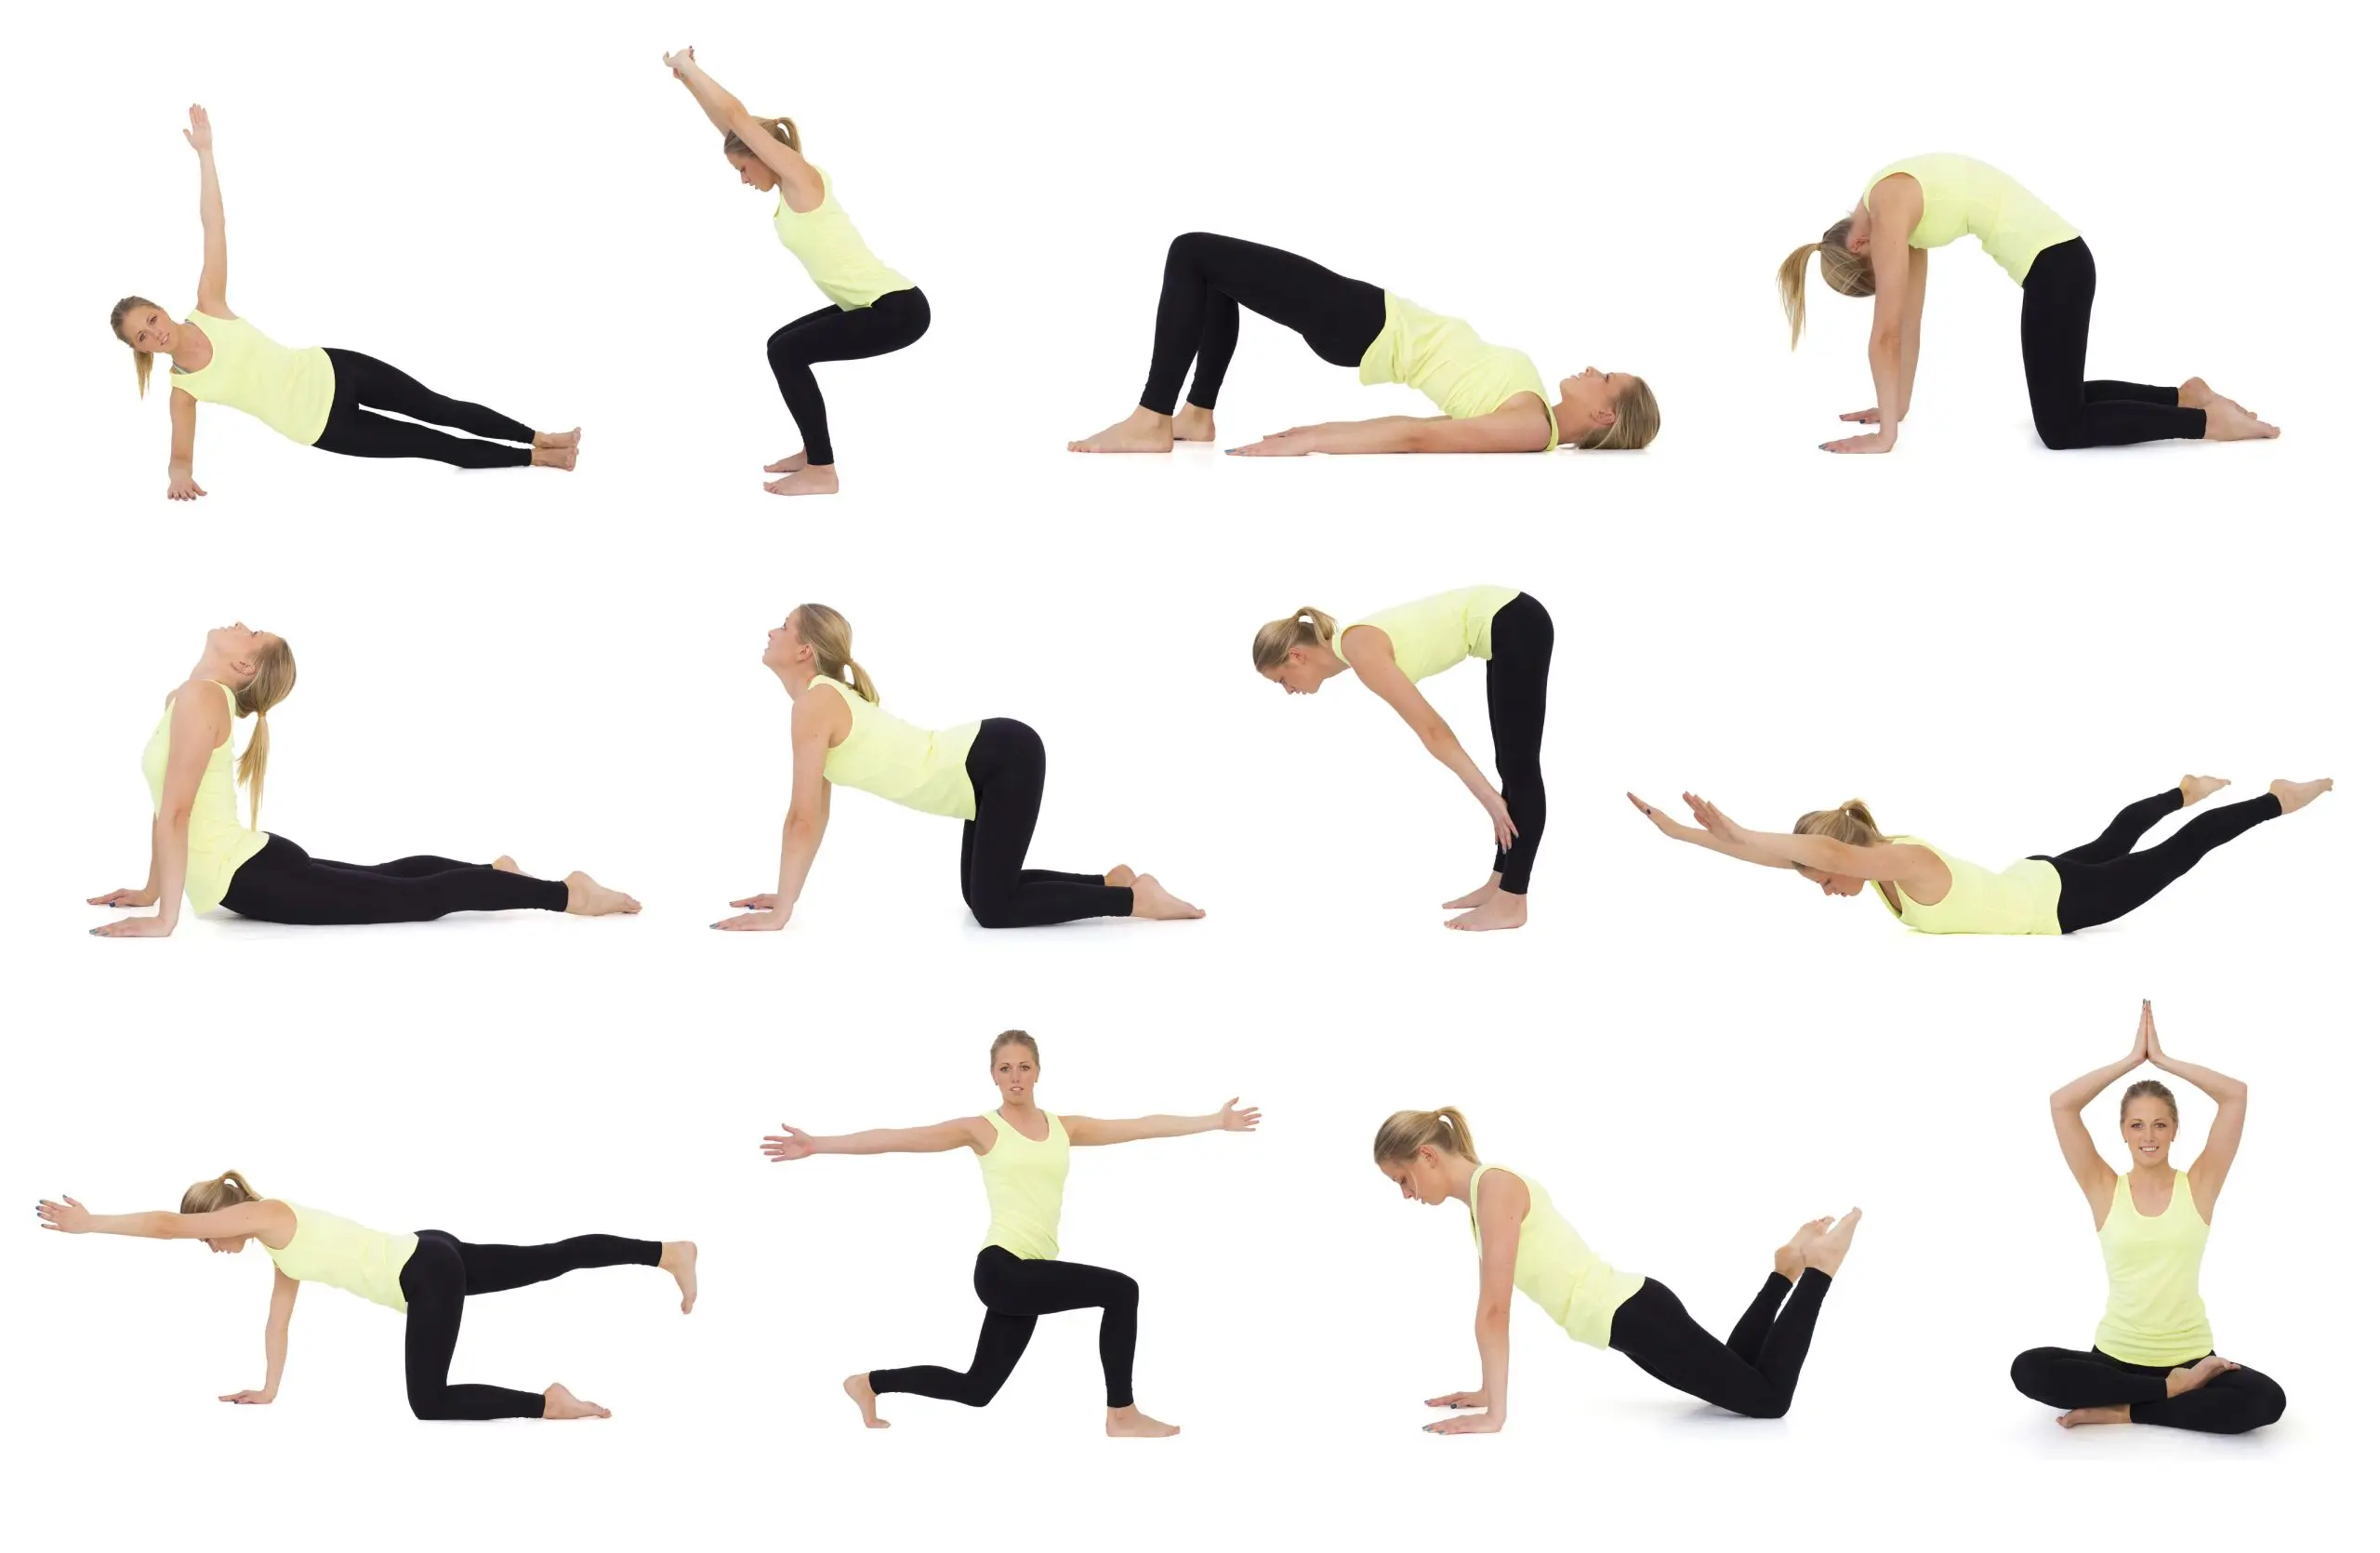 how to sequence a yoga class - How do you sequence a good yoga class